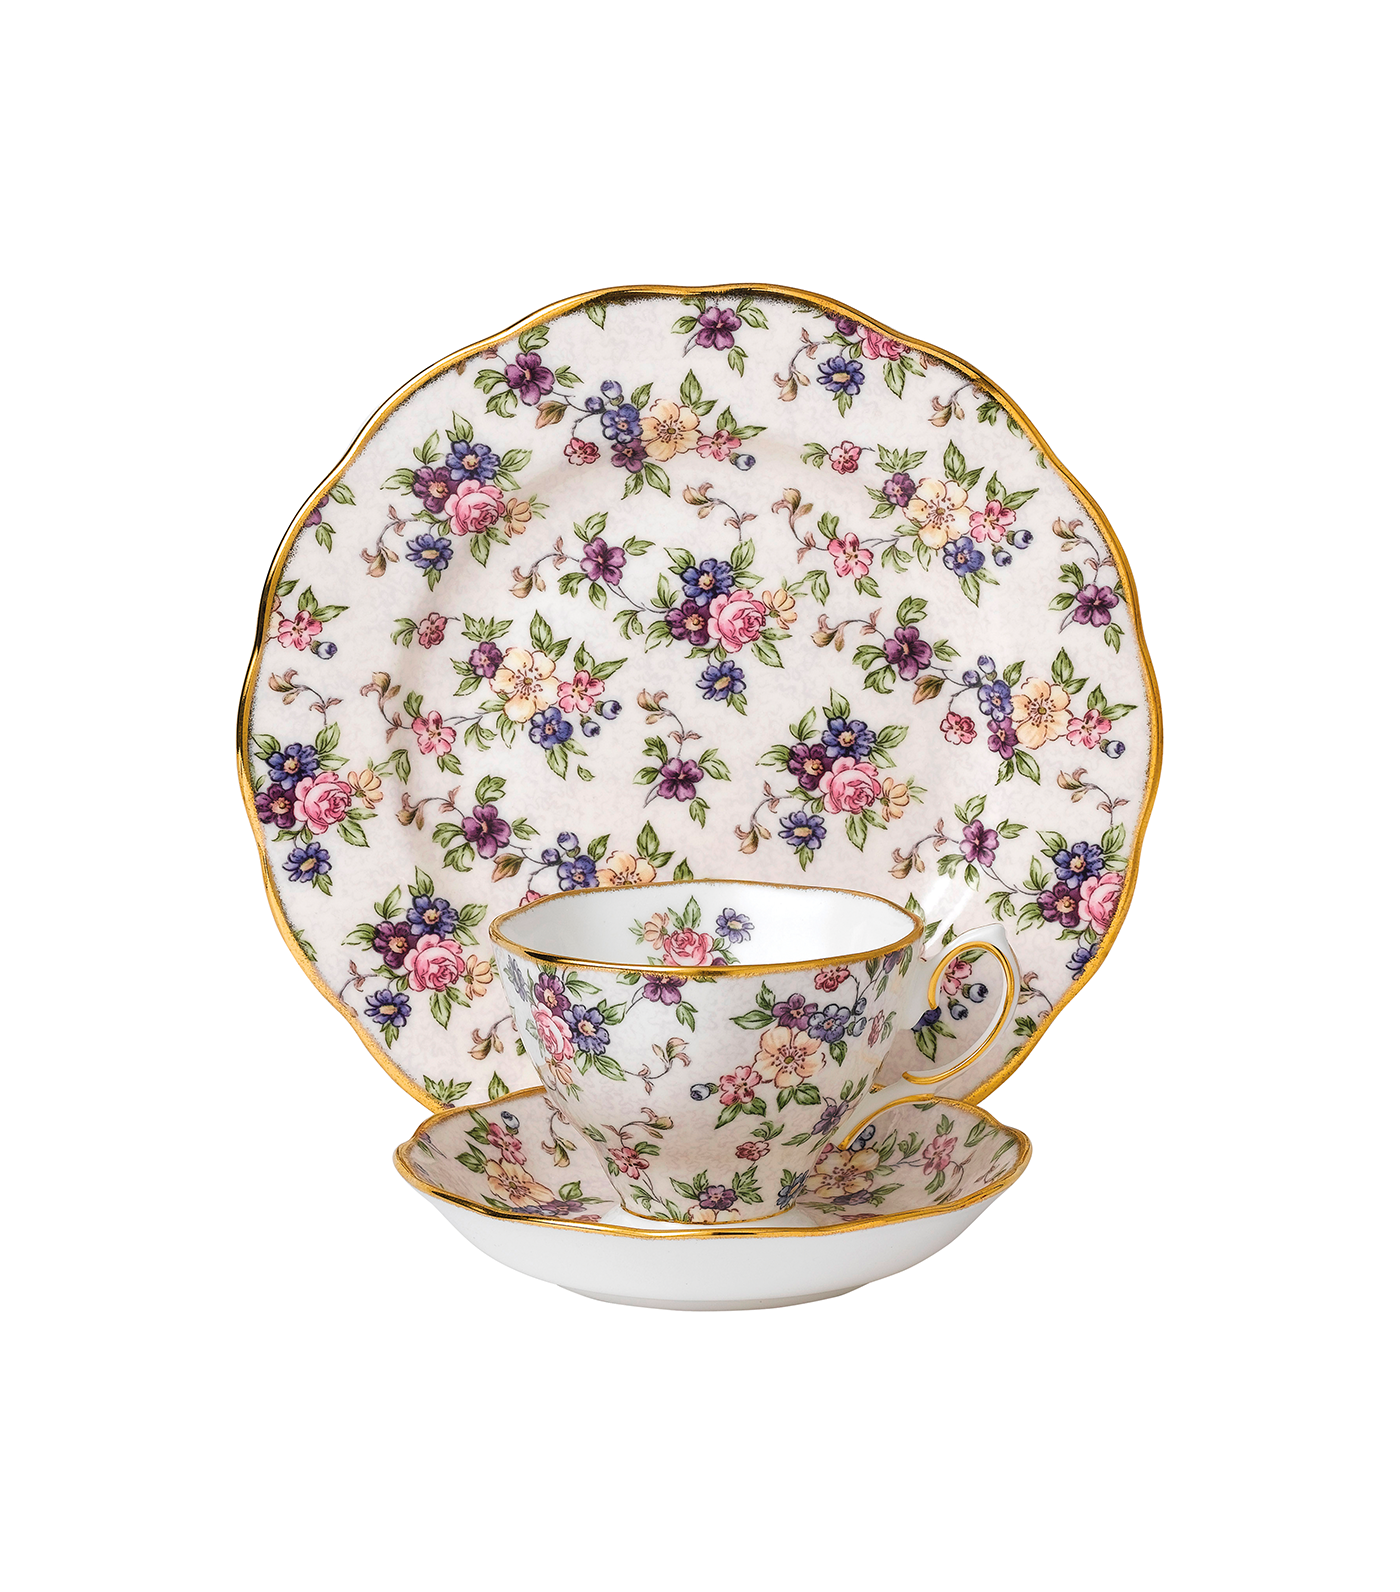 100 Years Of Royal Albert English Chintz 1940 Collection